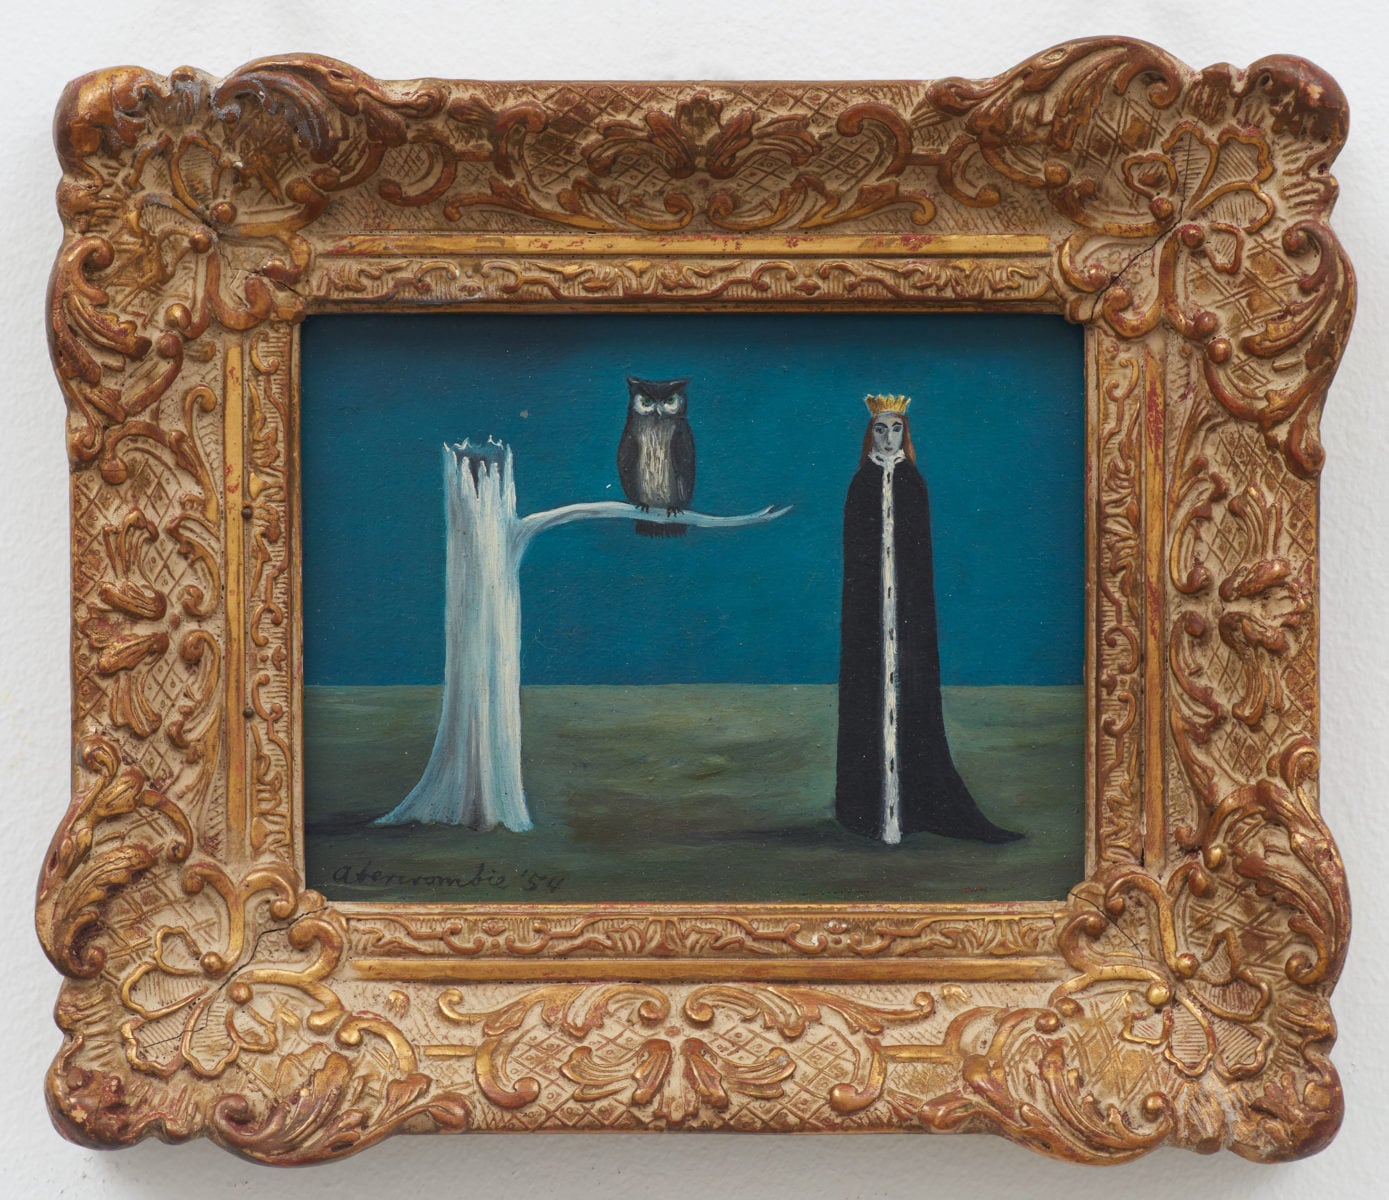 Image 02: Gertrude Abercrombie, Queen and Owl in Tree (1954), oil on Masonite, 114.3 x 152.4 mm (unframed), 190.5 x 215.9 mm (framed). Collection of Illinois State Museum, Illinois Legacy Collection, museum purchase.